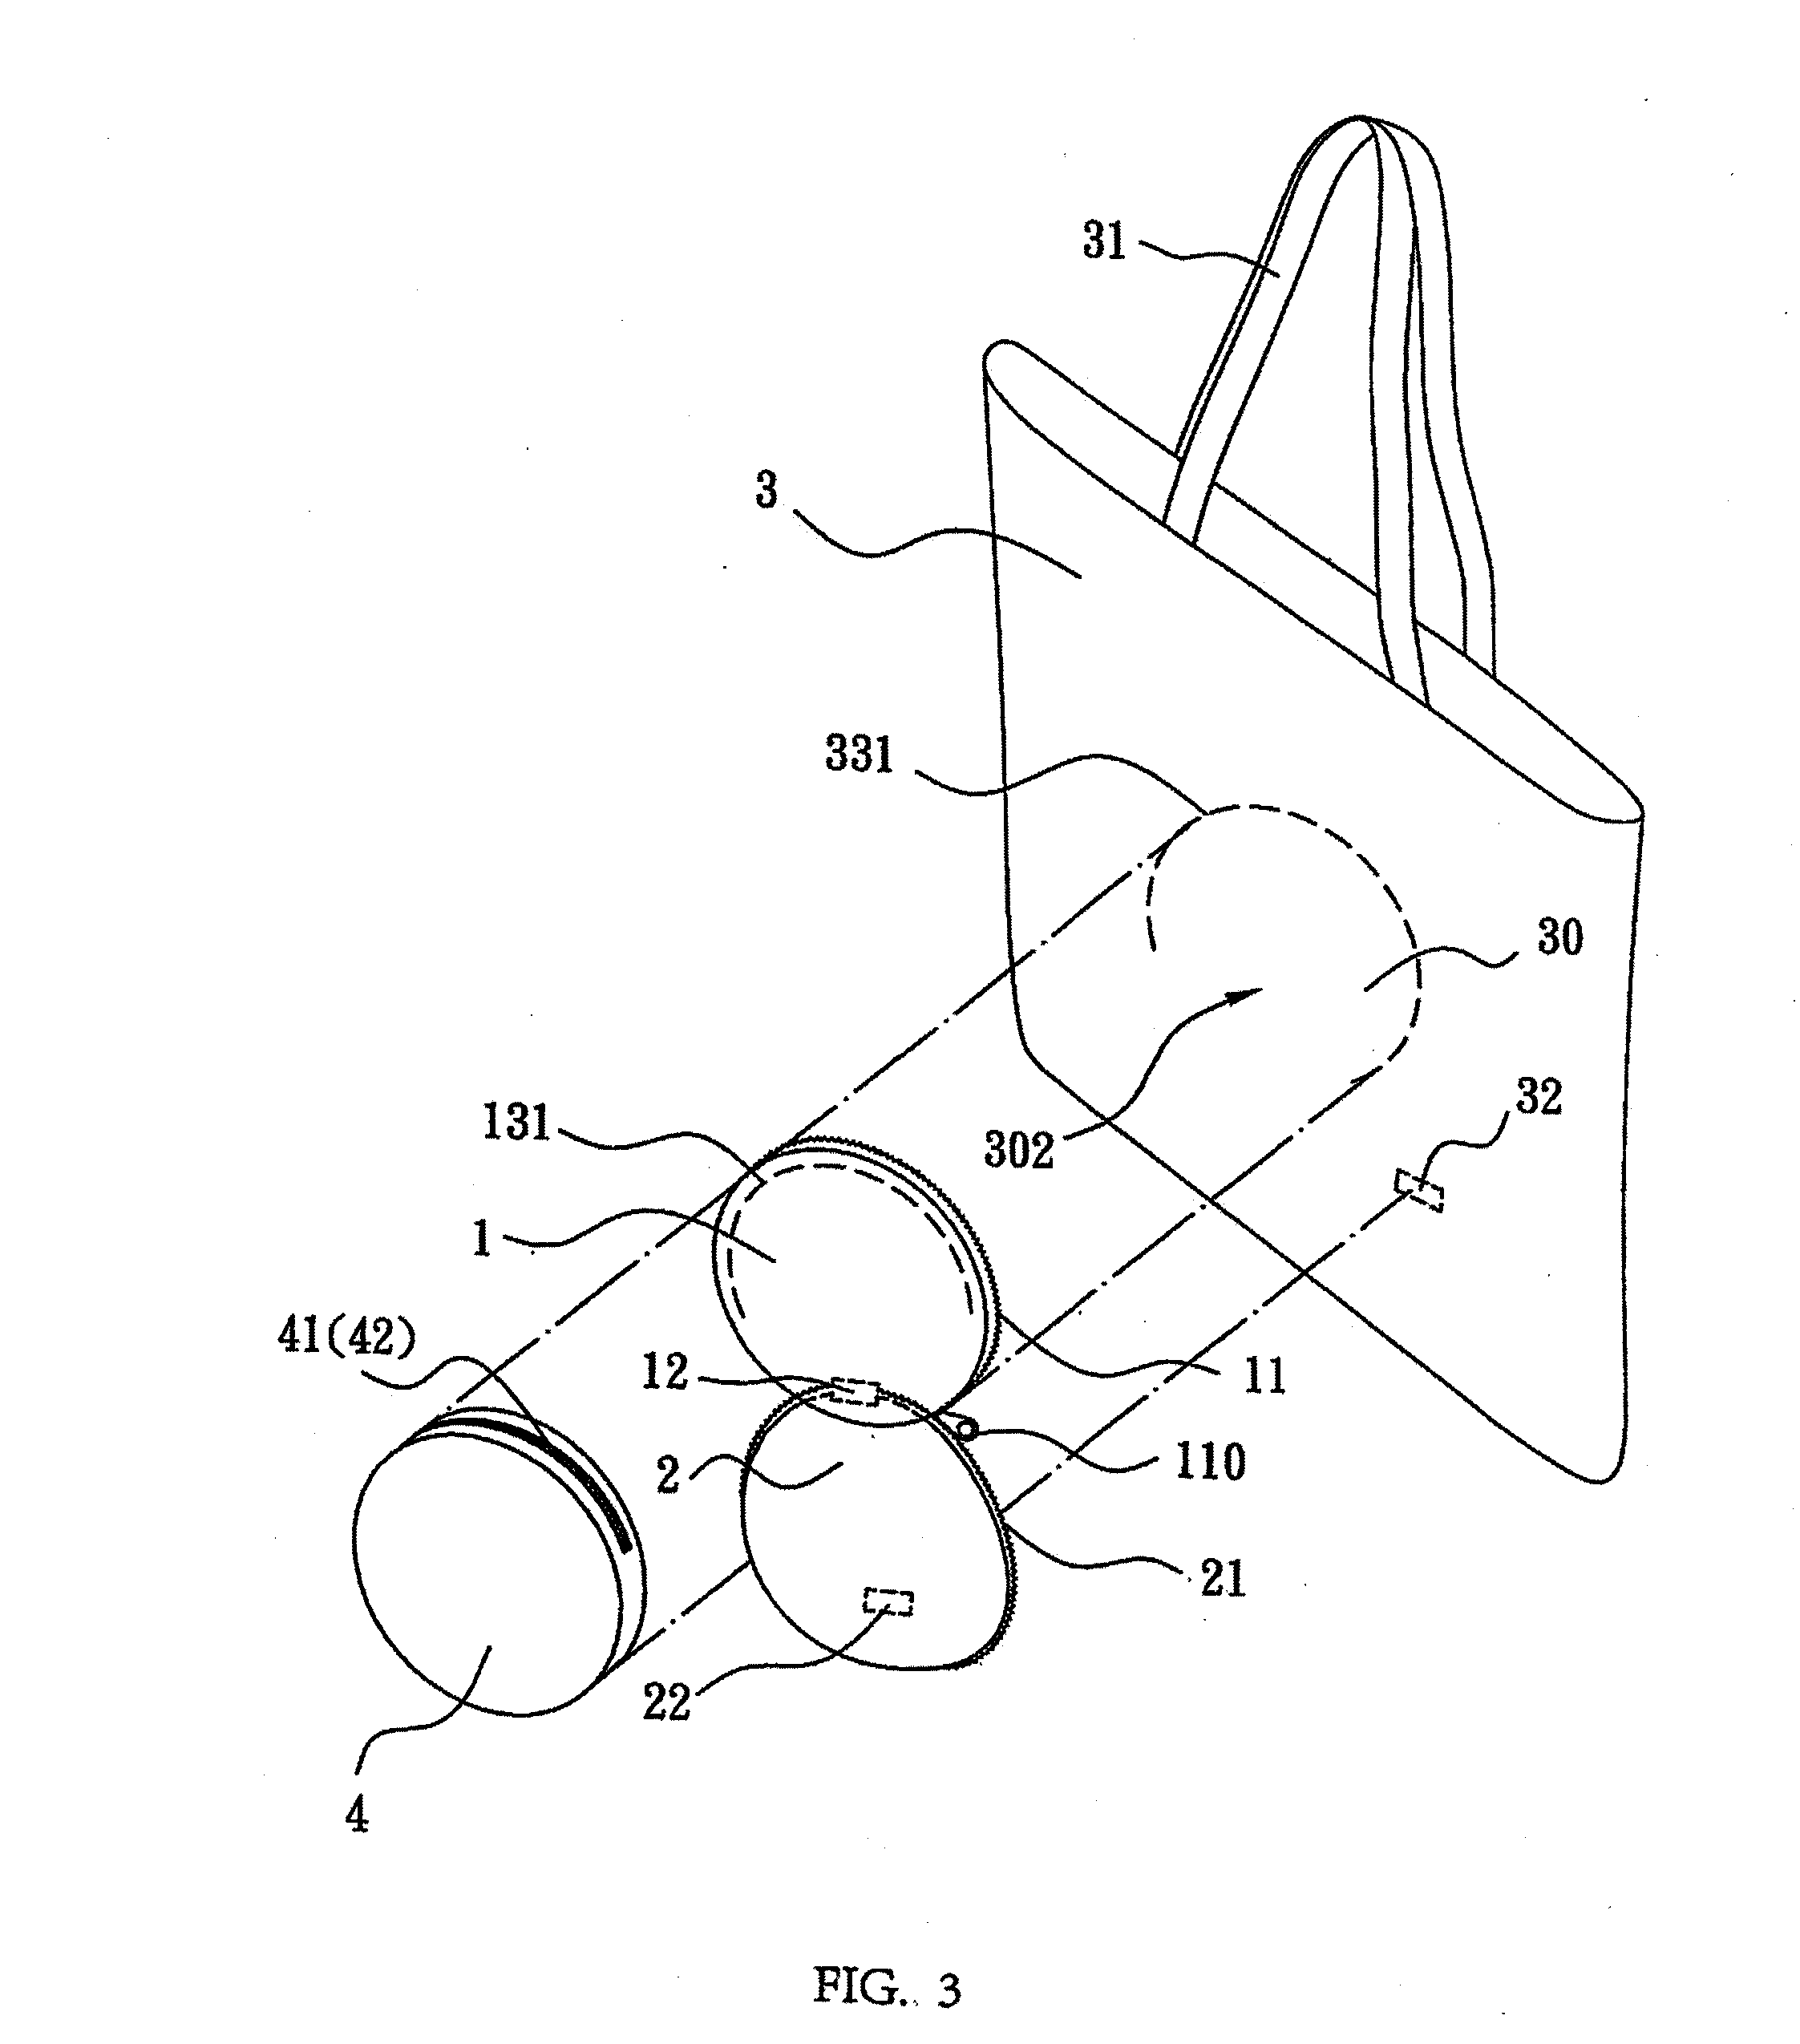 Cover-type containing structure for flexible enclosures